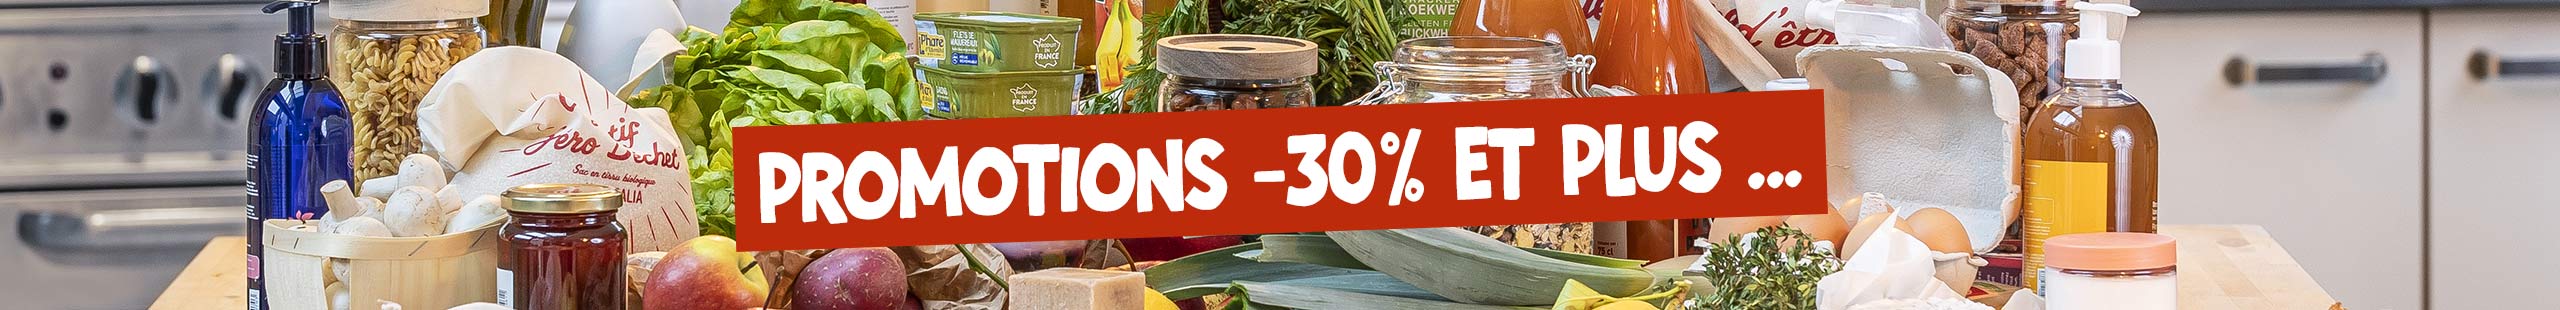 -30% promotions